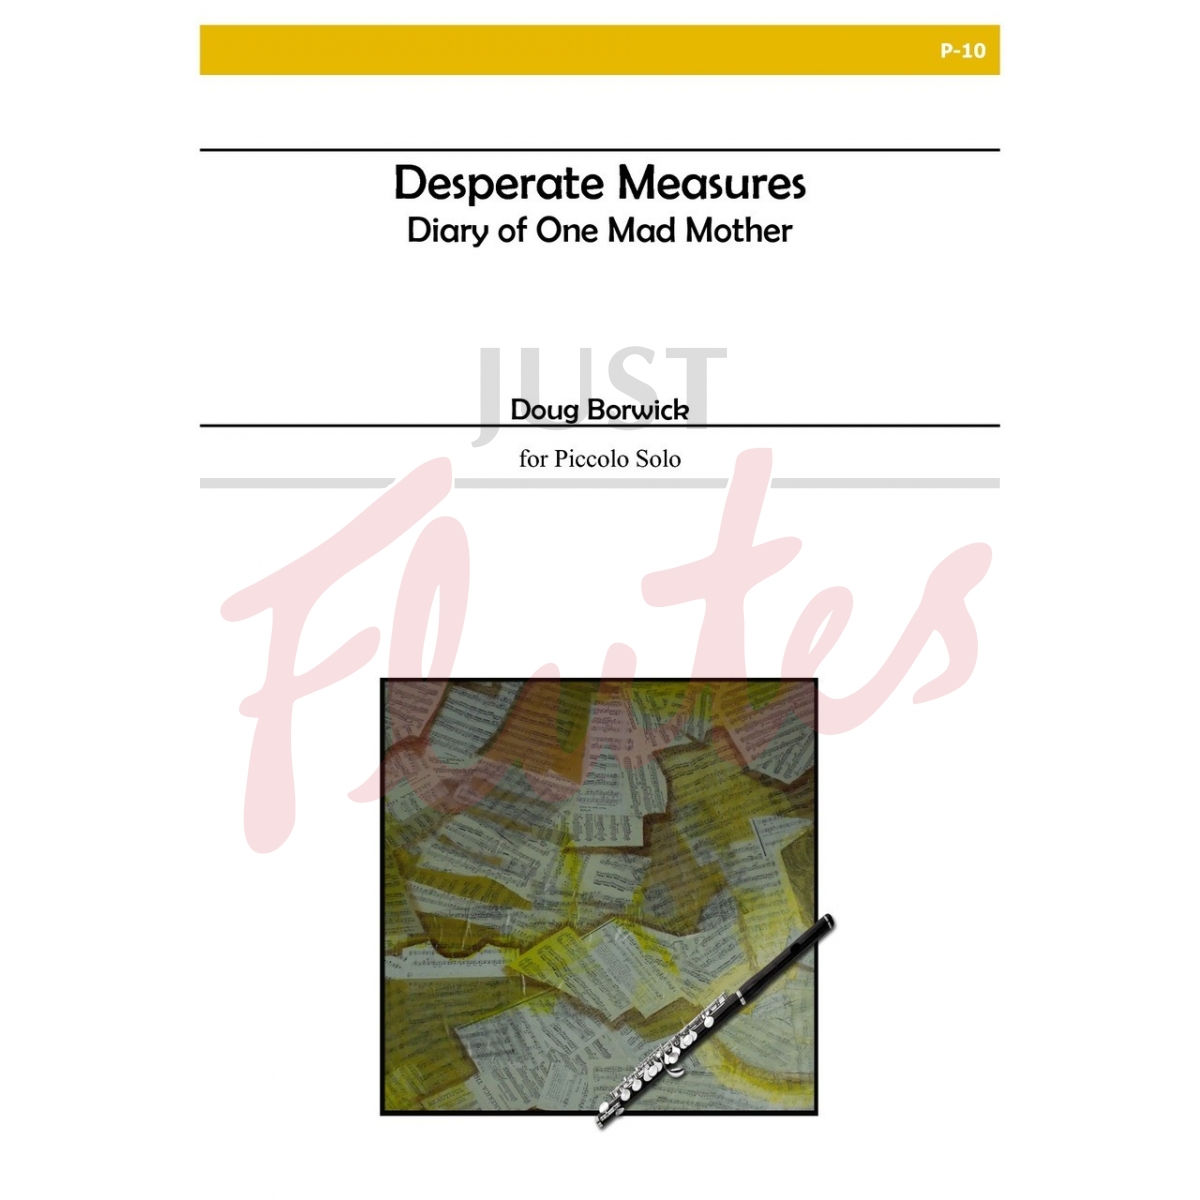 Desperate Measures - Diary of One Mad Mother